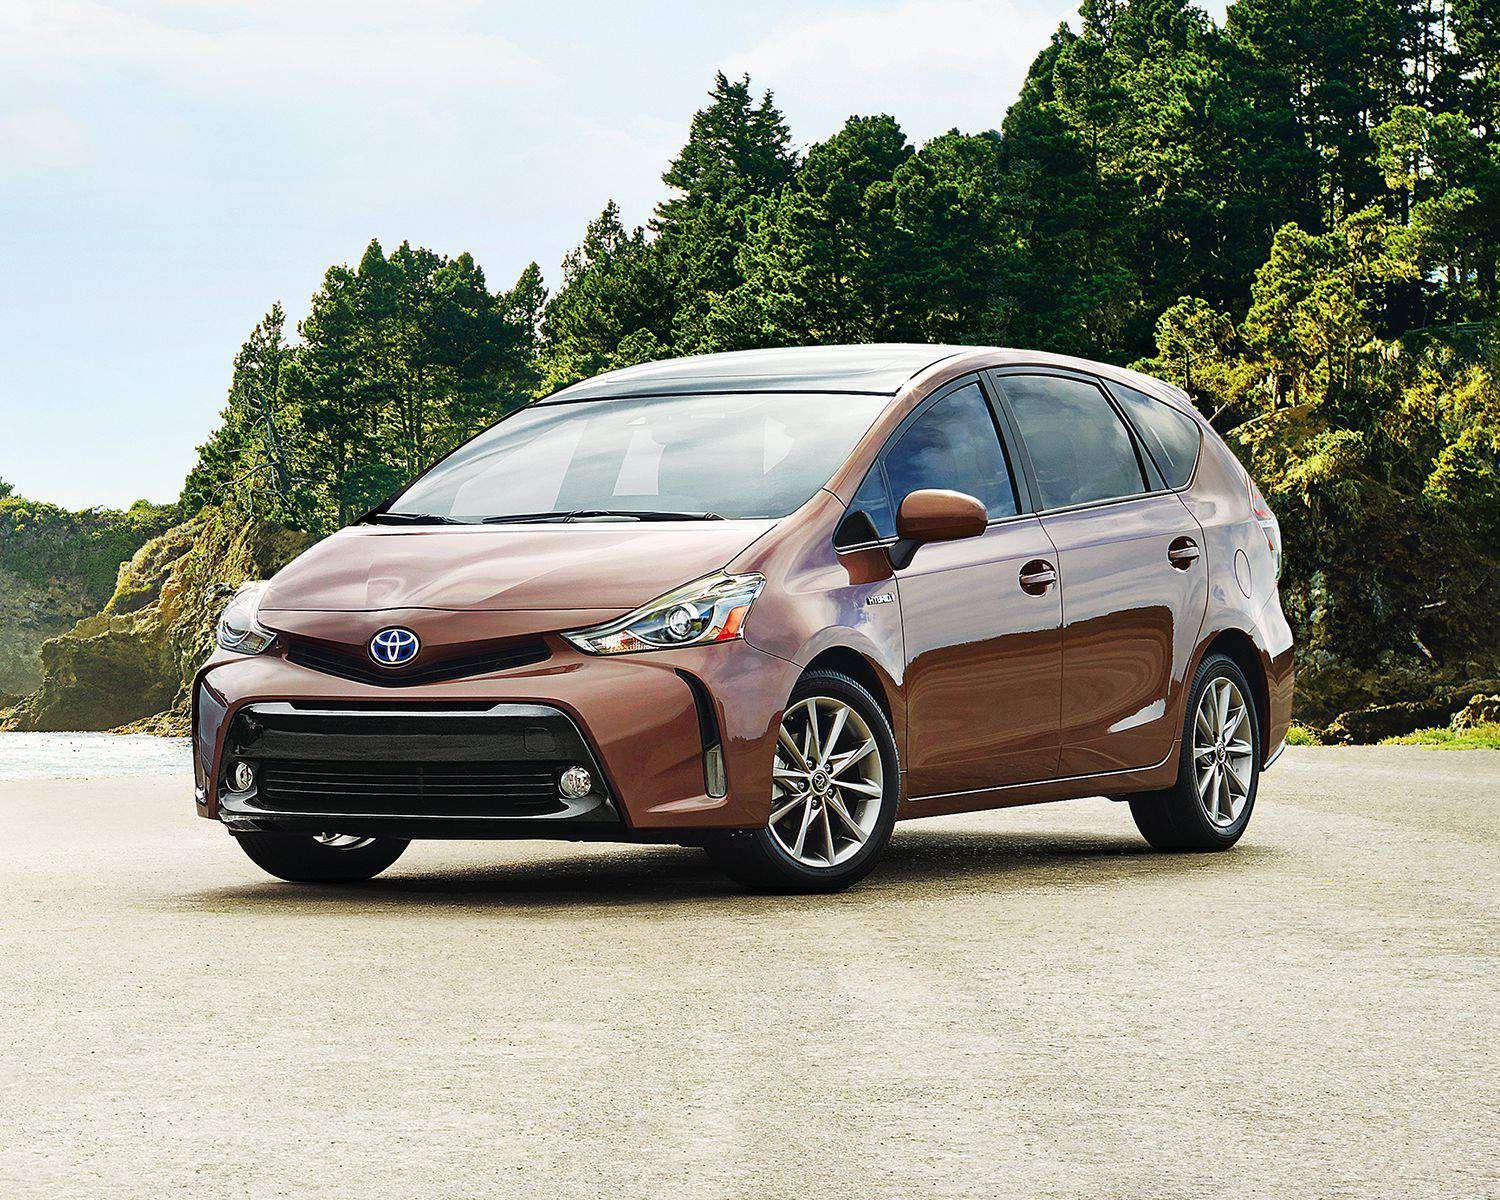 2018 Toyota Prius V: Prices and Specifications|Longueuil Toyota